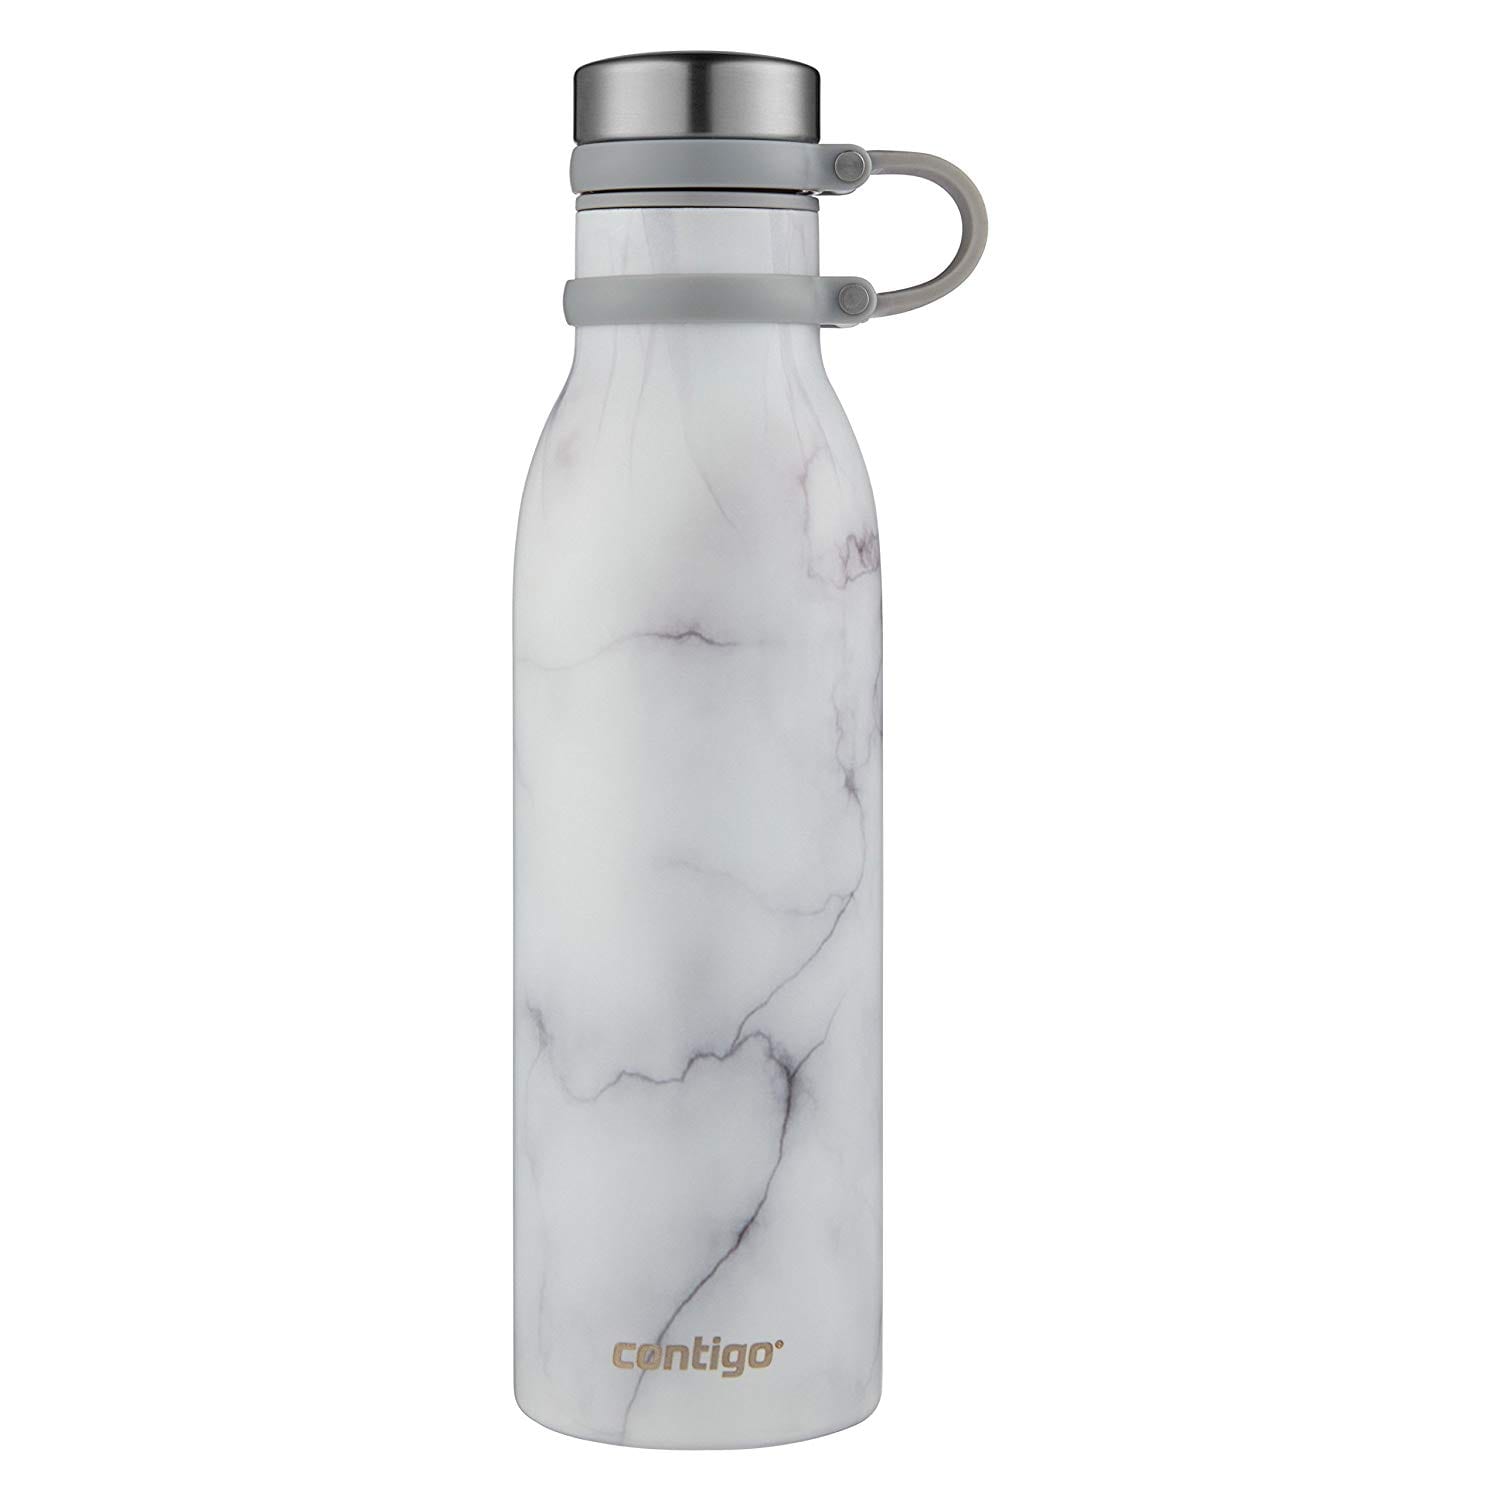 Contigo Couture Vacuum Insulated Stainless Steel Water Bottle